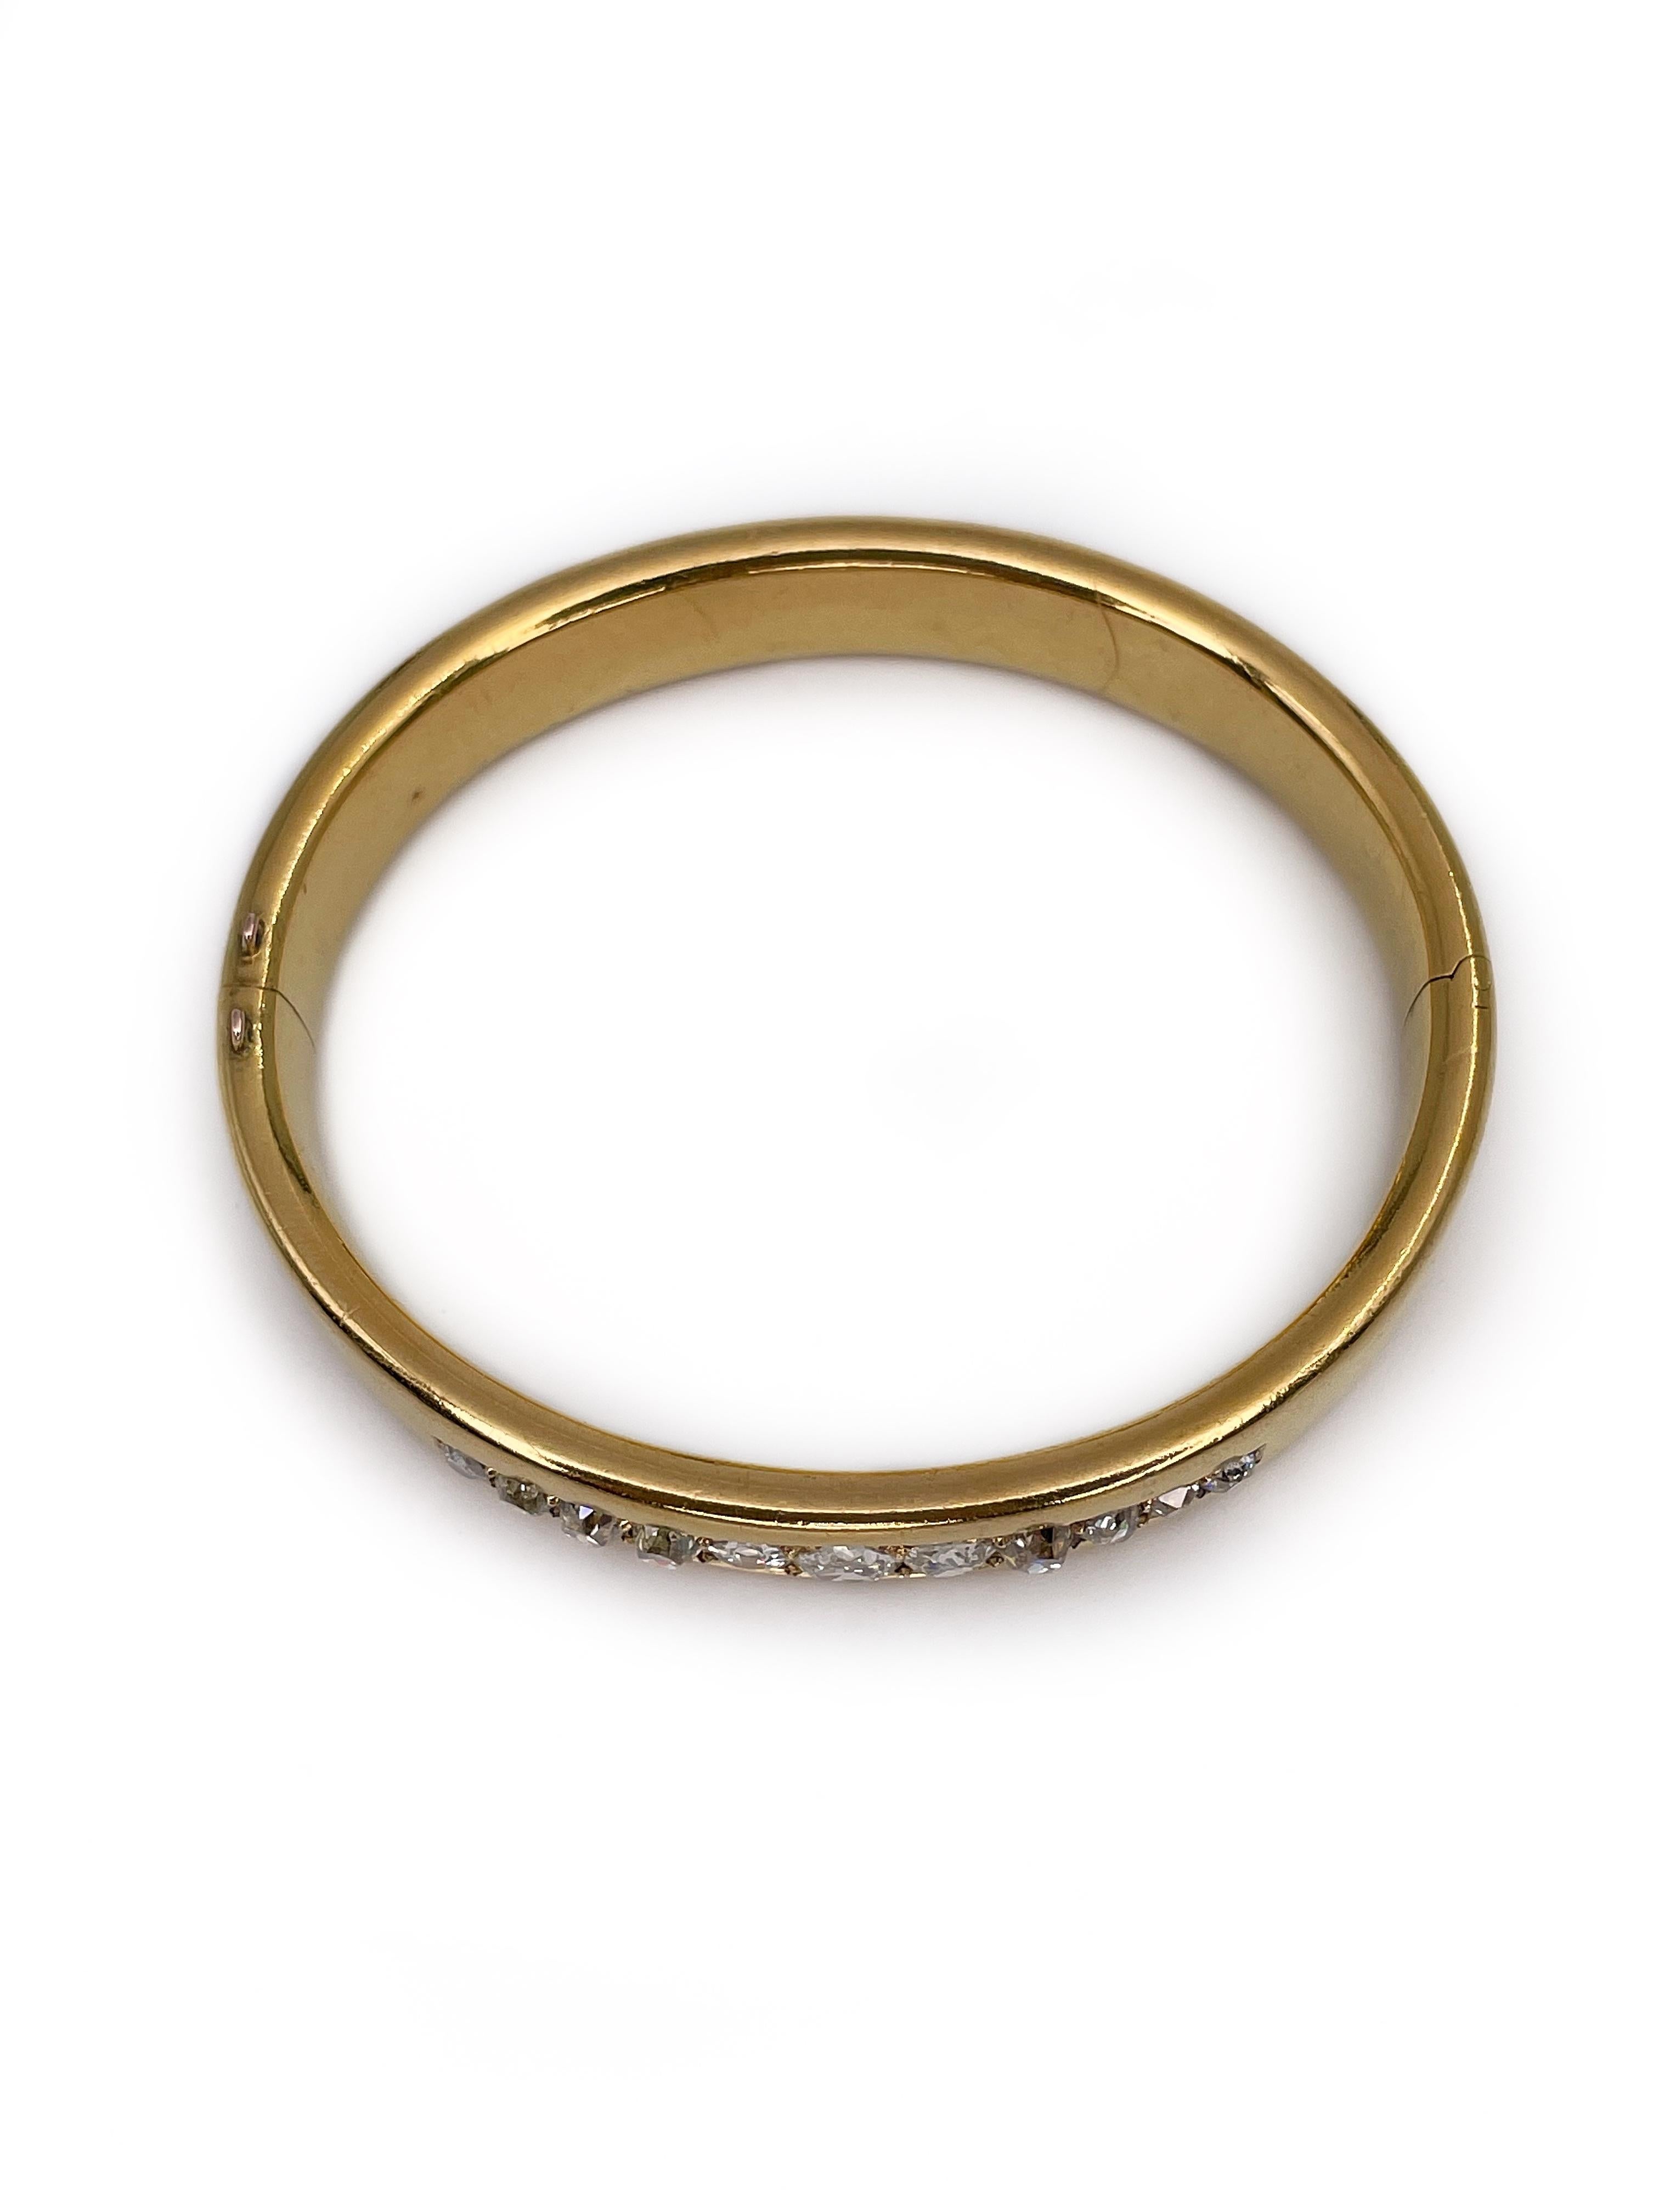 This is Victorian hinged bangle bracelet crafted in 22K yellow gold. The piece features 11 old mine cut diamonds. 

As antique, they are all of different parameters. Clarity is VS2-SI2. Colour ranges from G-H to J-K. 

These antique gems are amazing